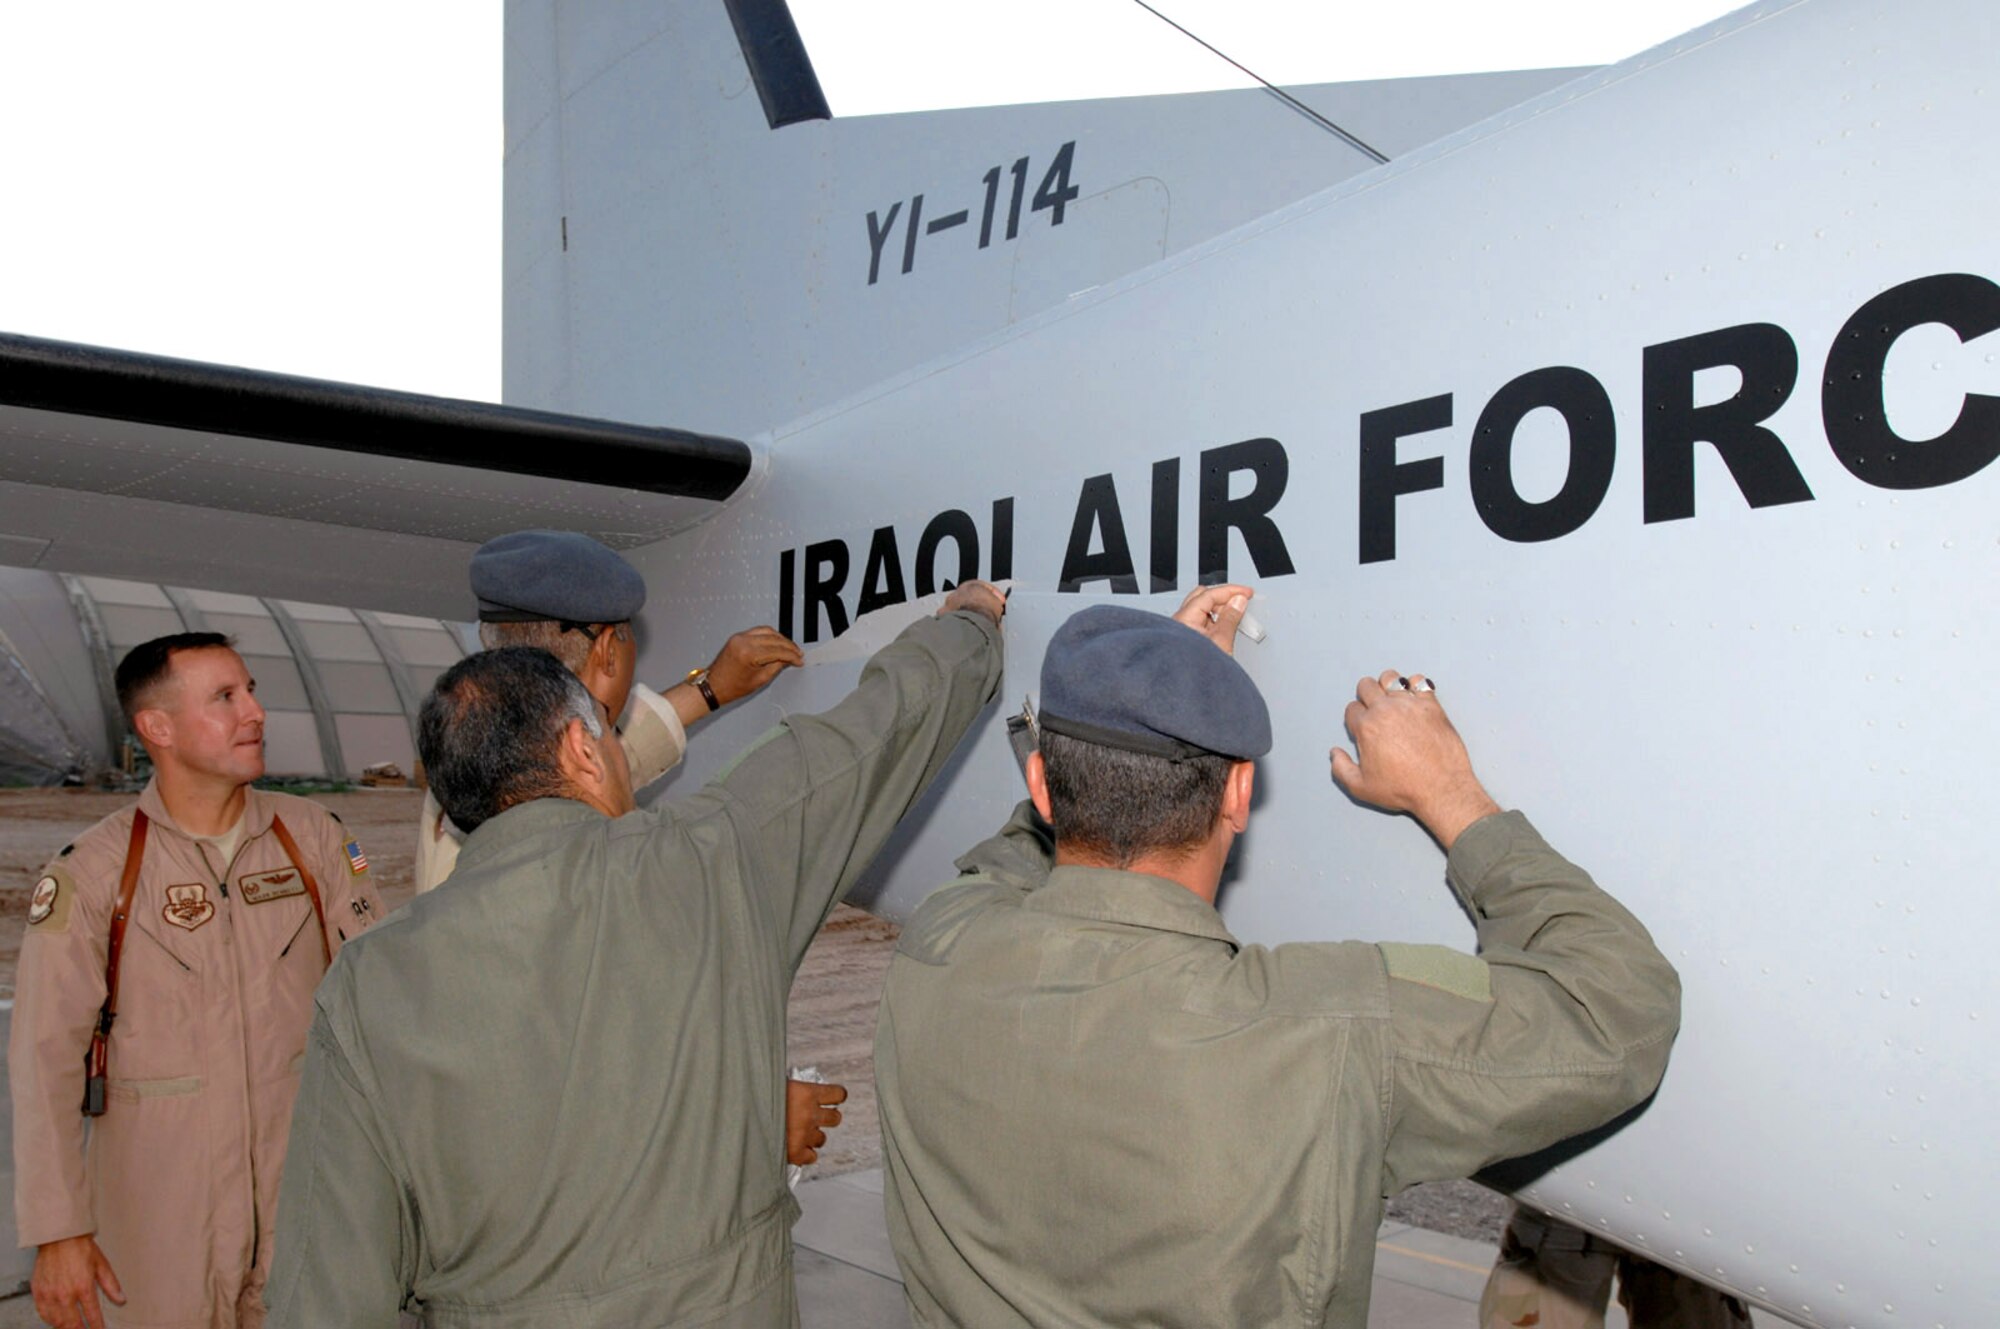 Iraqi pilots remove tape off a new Cessna 208 Caravan to reveal the Iraqi air force markings March 29 at Kirkuk Air Base, Iraq. The Cessna 208 is the advanced fixed wing training aircraft for the Iraqi Flying Training Wing. Iraqi students spend approximately six months learning to fly the Cessna and receive pilot wings upon completion of the training syllabus. They then move onto the Iraqi air force's operational aircraft which includes the C-208, King Air, C-130 Hercules or SAMA (Zenair) CH-2000. The Iraqi Air Force Flying Training Wing inventory will have a total of five Cessna 208s by the end of 2008. (U.S. Air Force/Senior Master Sgt. Don Senger) 